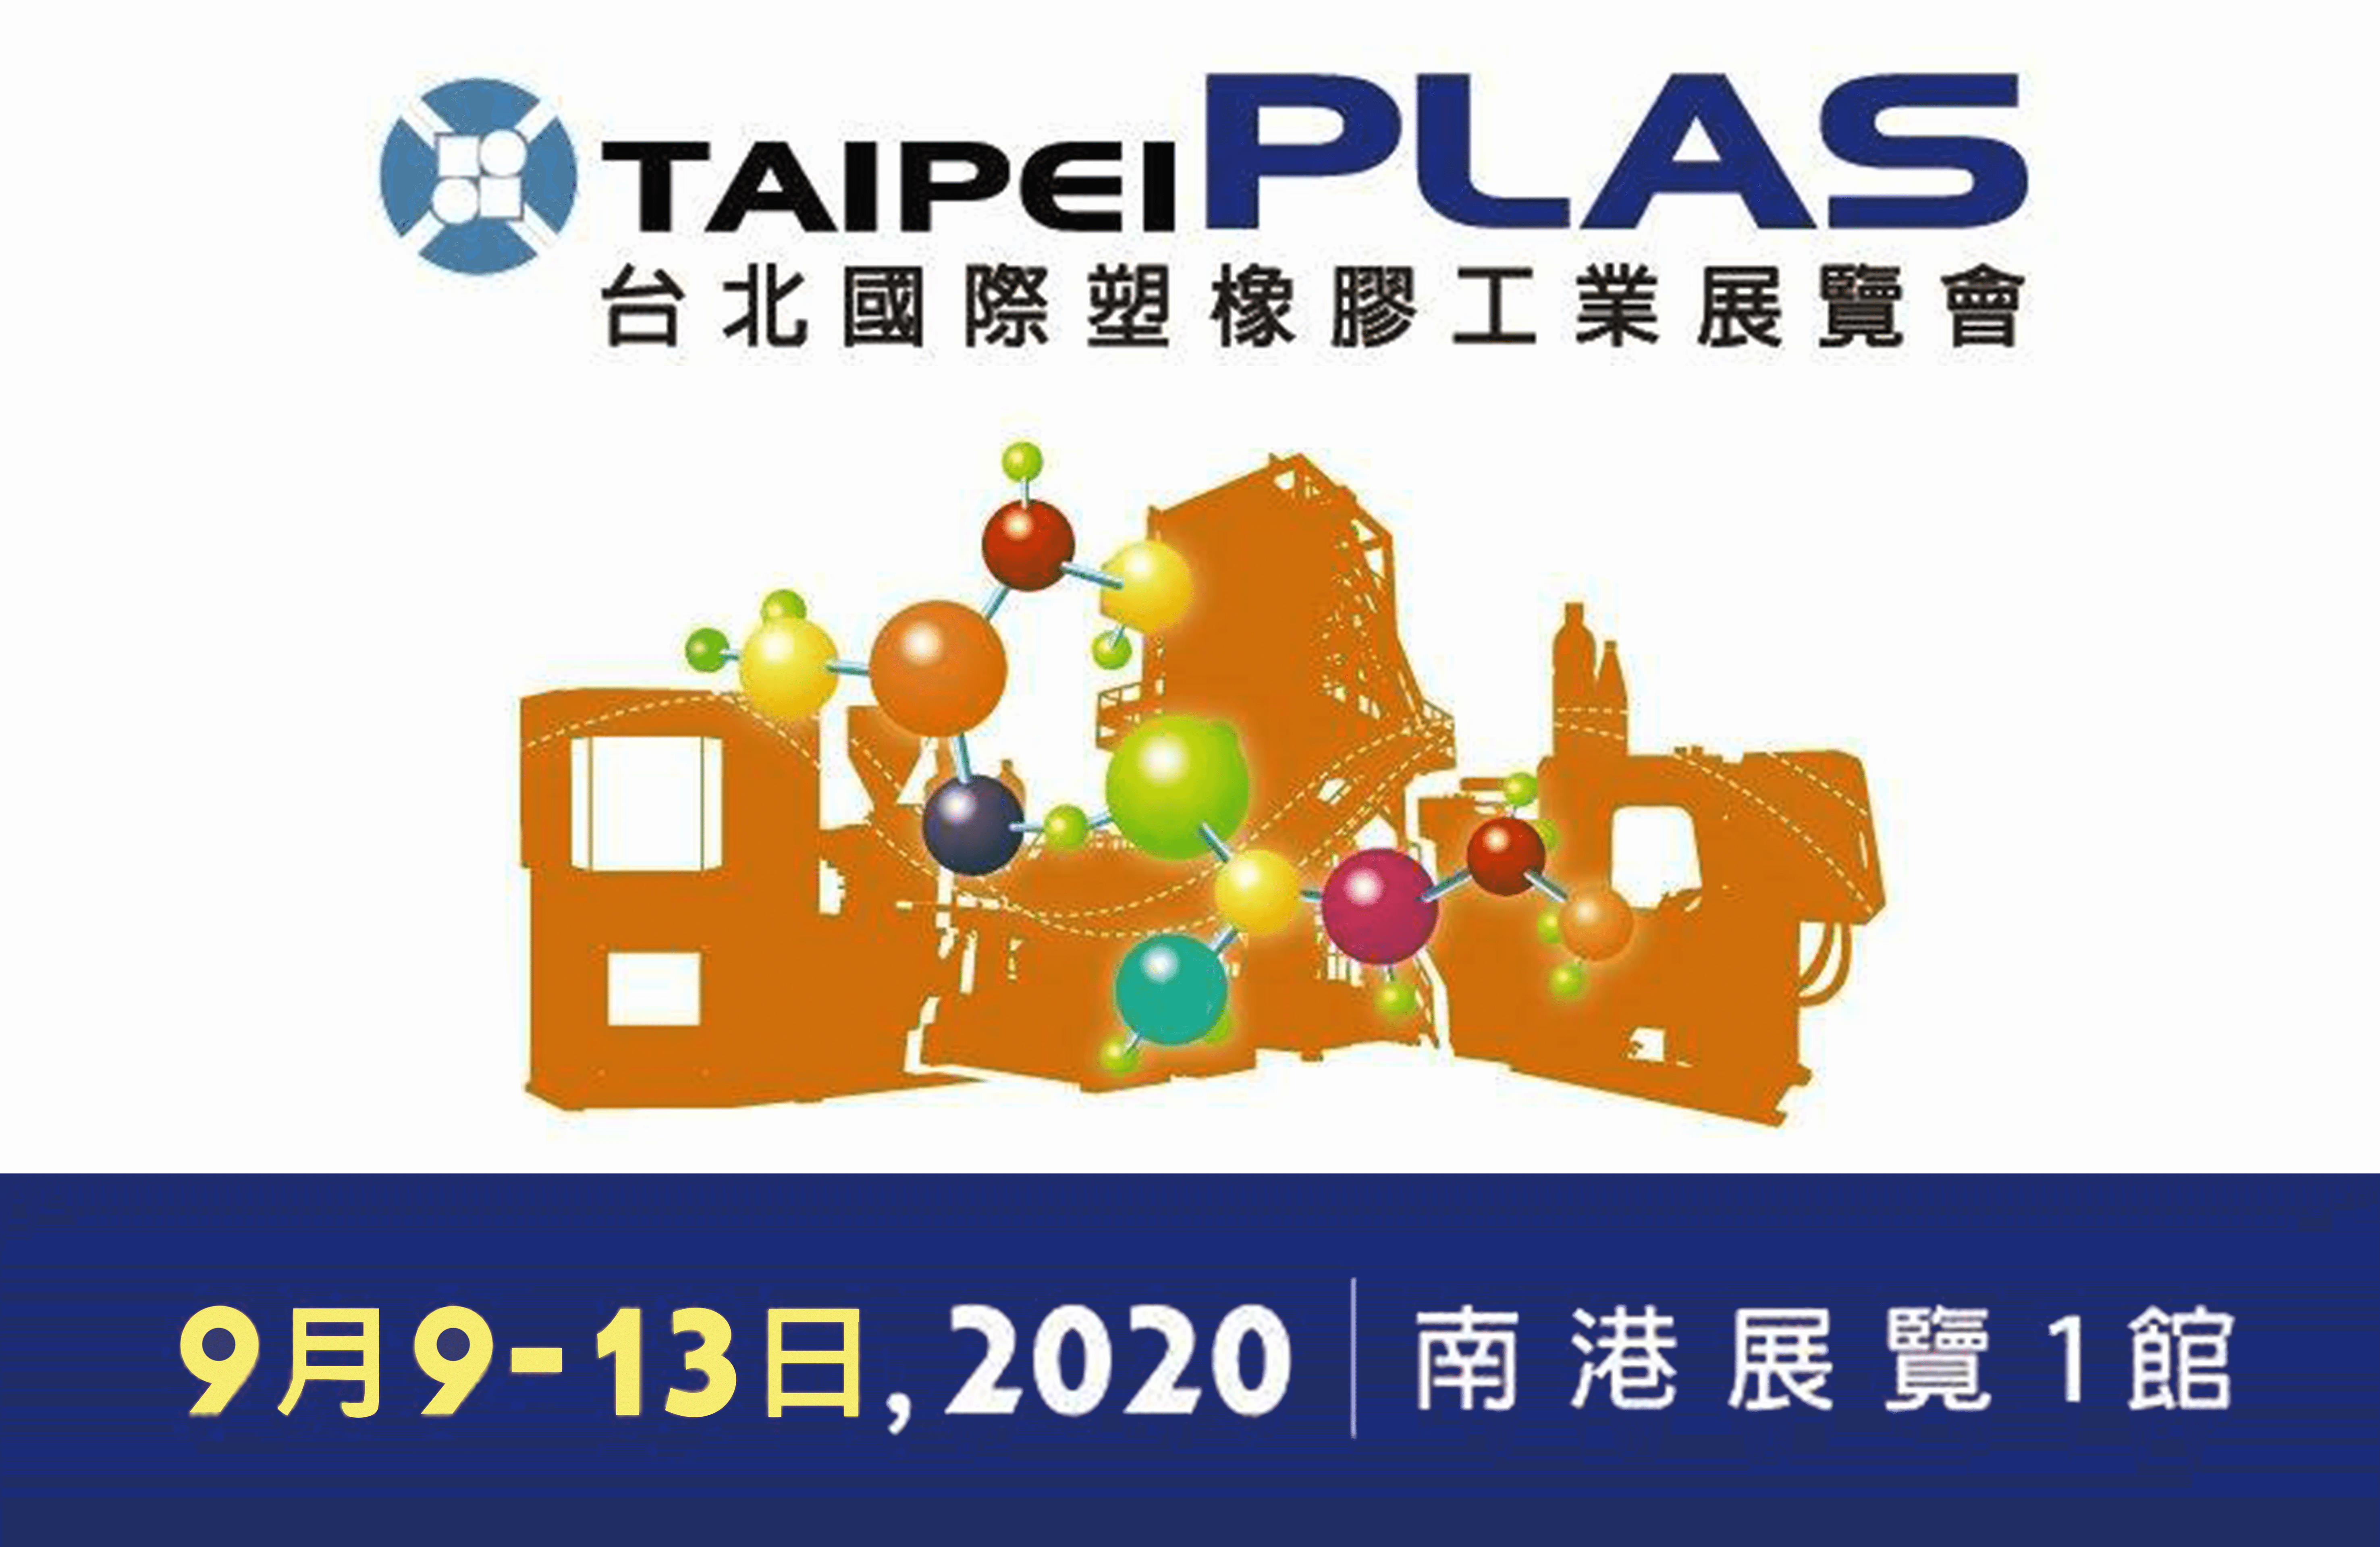 Seize Business in TAIPEIPLAS 2020! Coming up on September